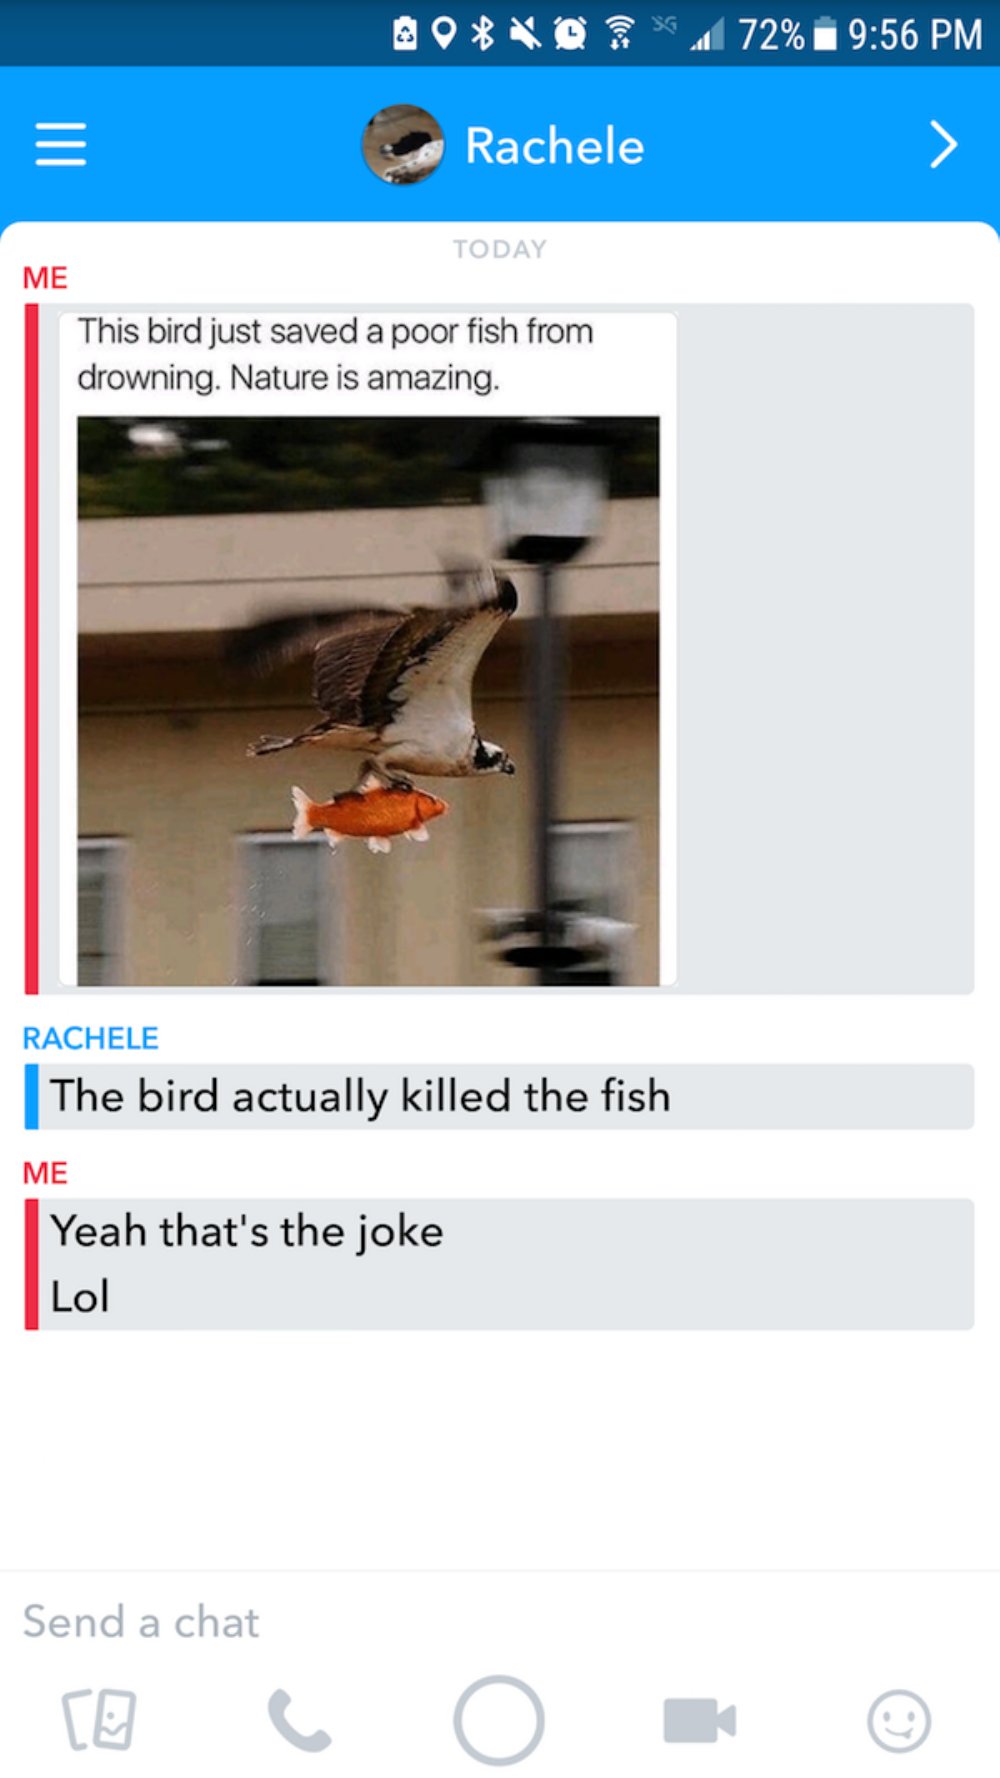 missed - bird saved that fish from drowning - 80 72% Rachele Today Me This bird just saved a poor fish from drowning. Nature is amazing. Rachele The bird actually killed the fish Me Yeah that's the joke Lol Send a chat